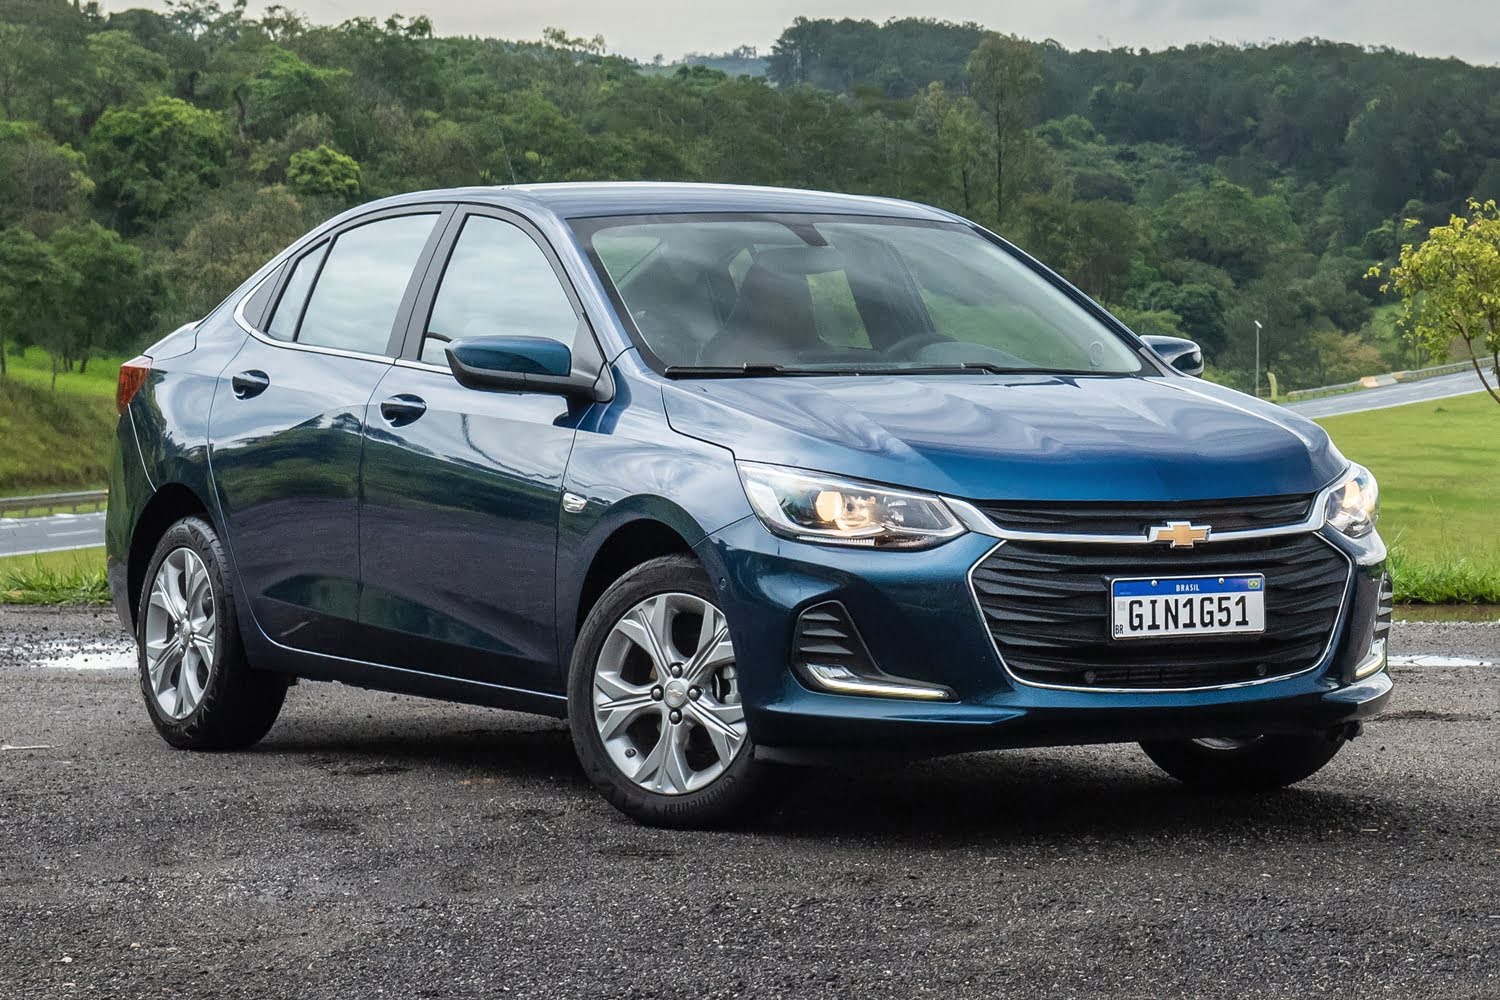 Chevy Onix Is Brazil's Most Fuel-Efficient Vehicle